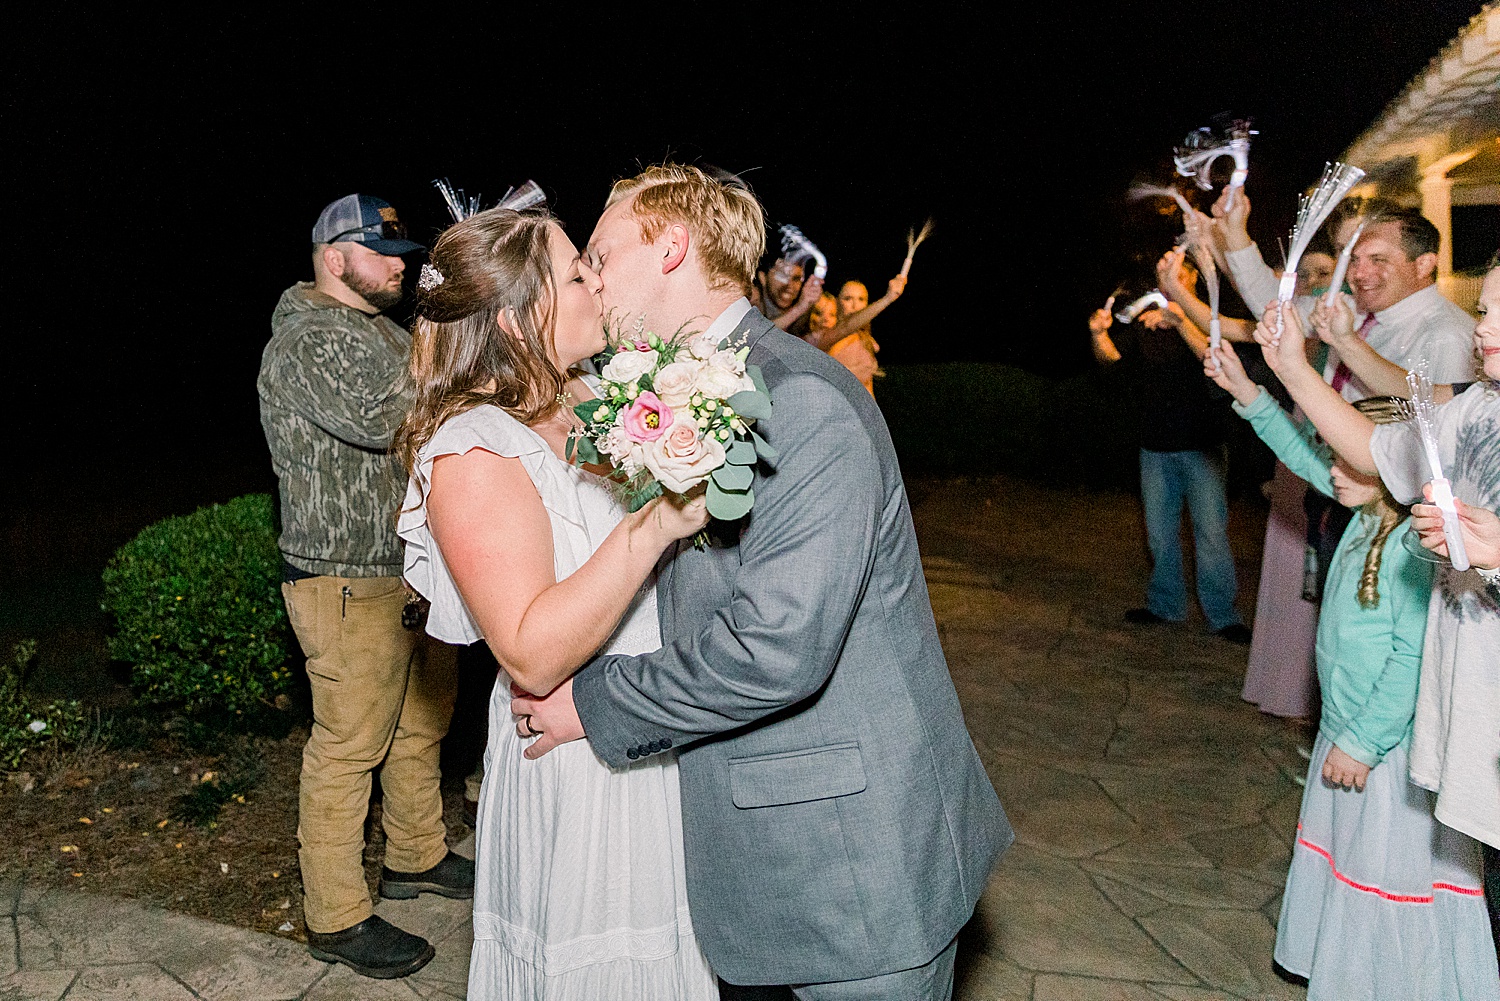 newlyweds kiss at the end of their wedding night